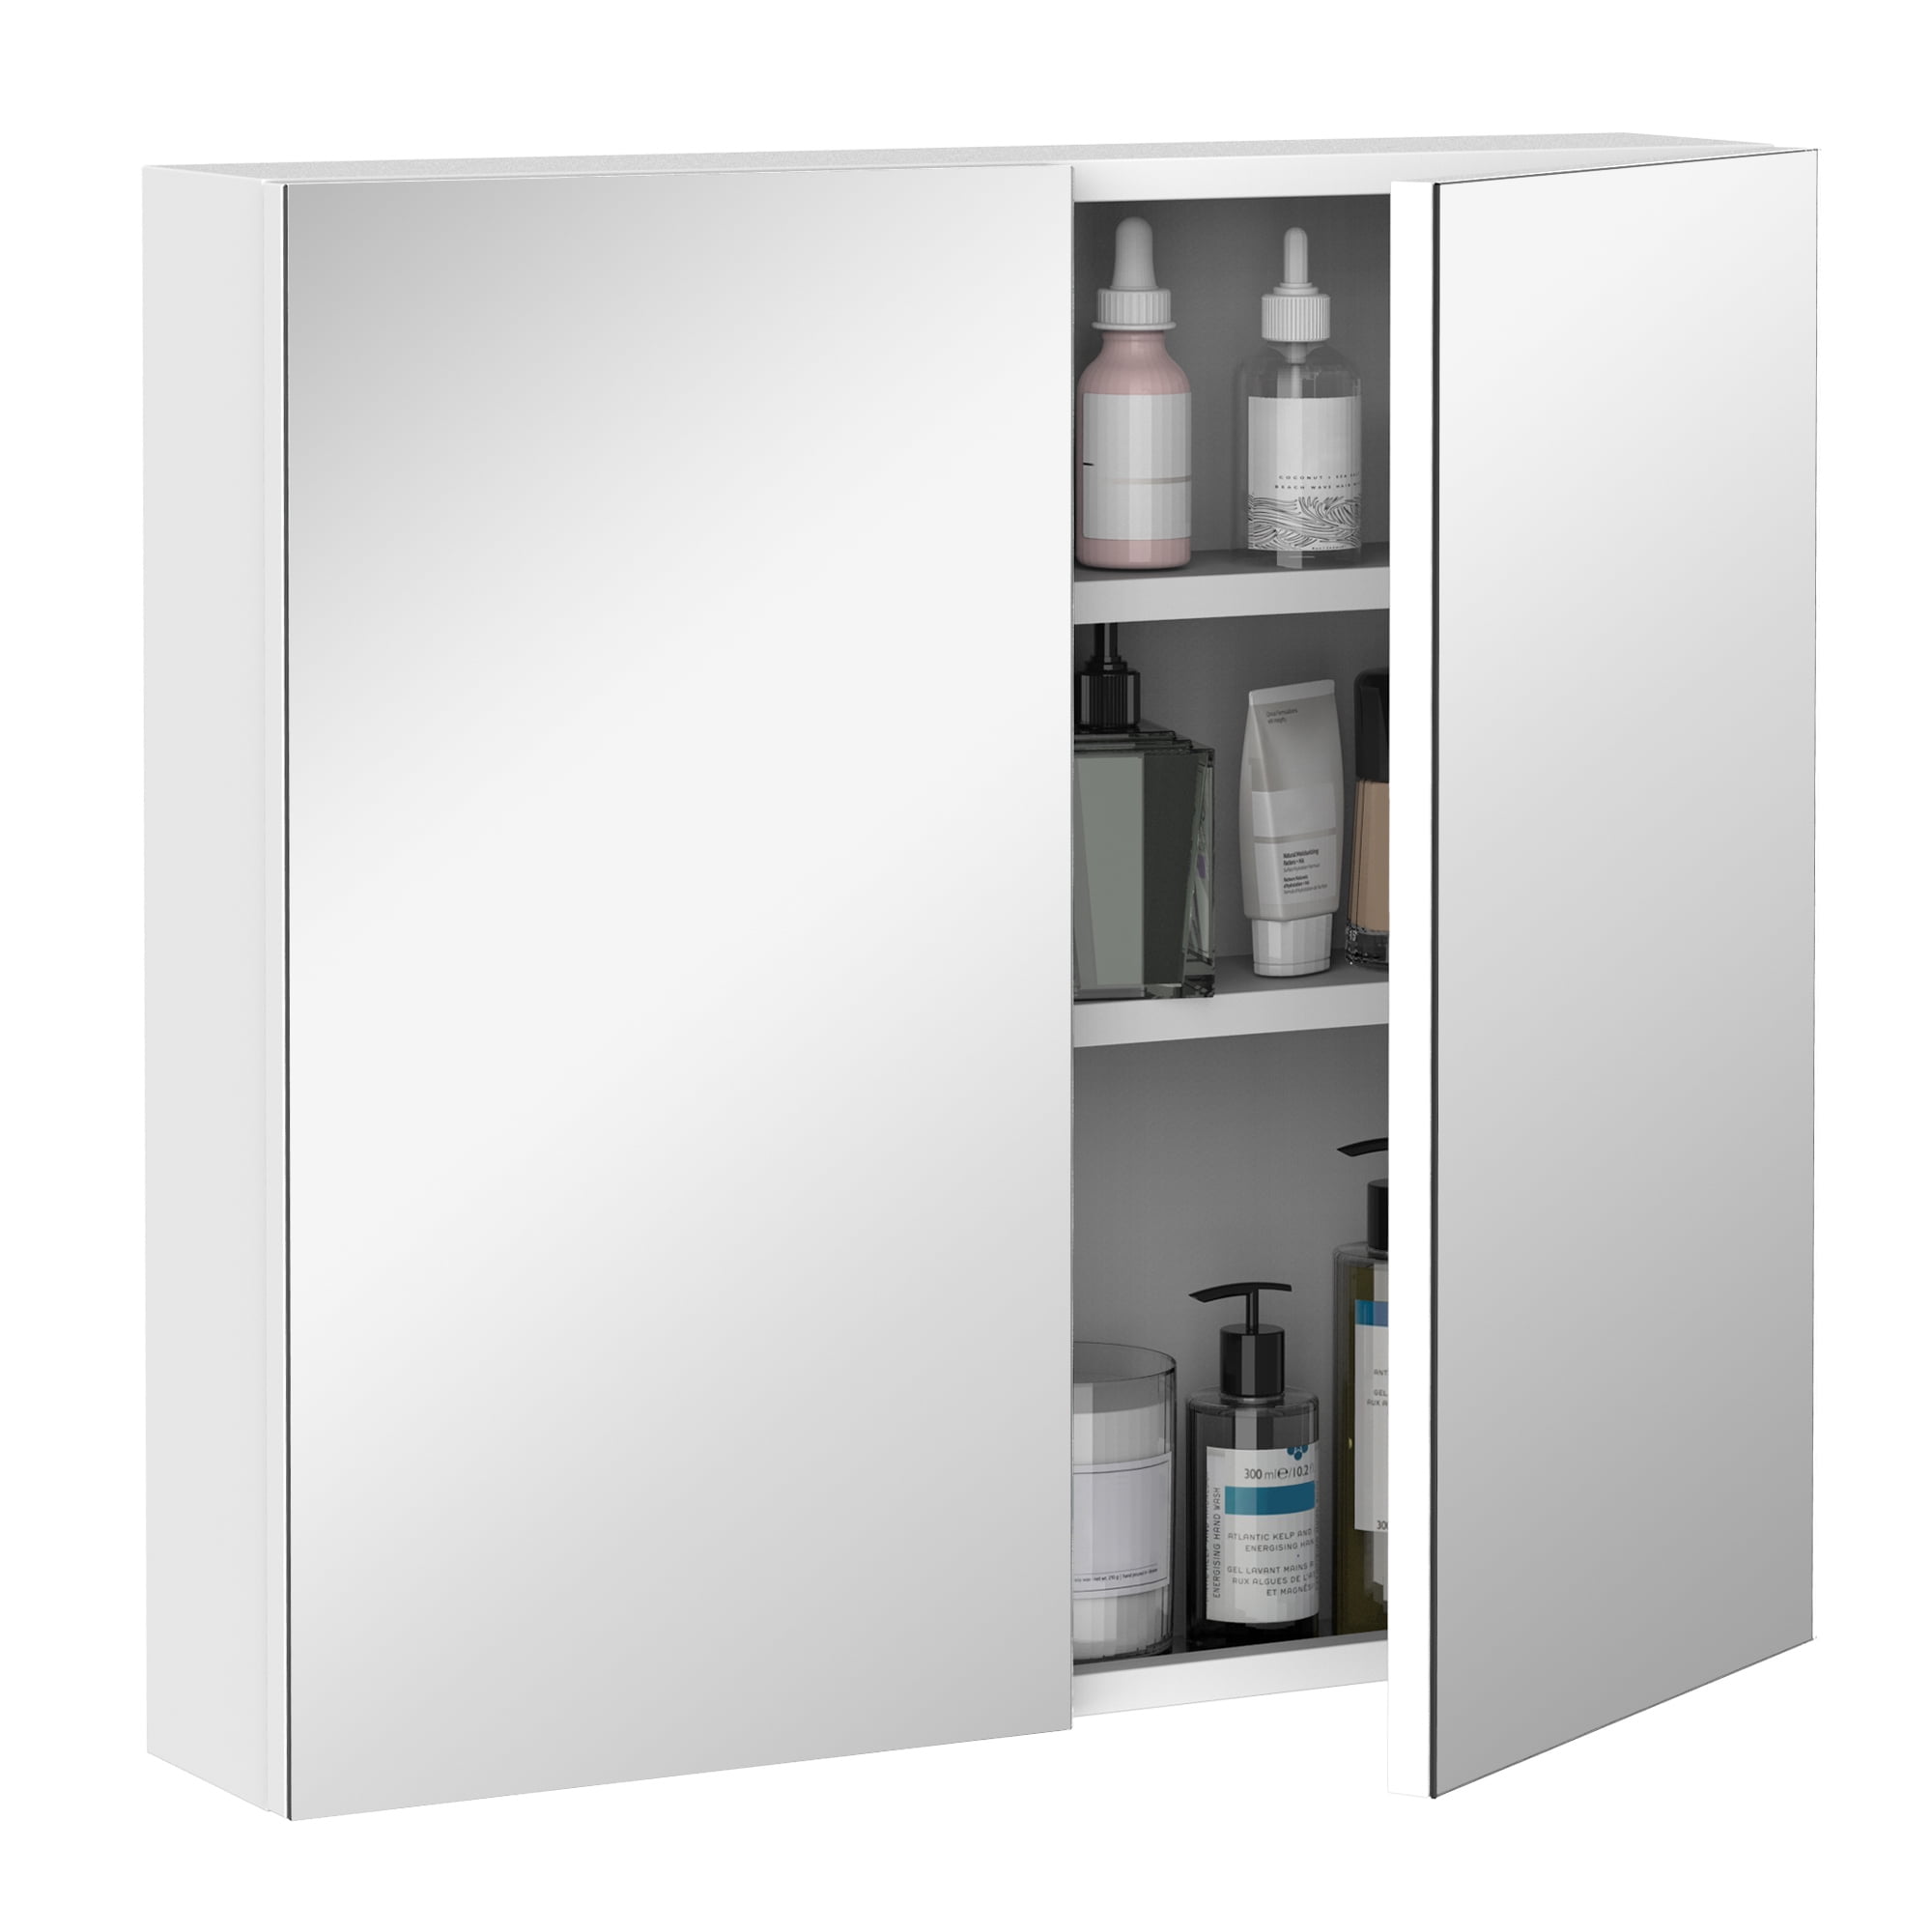 kleankin Bathroom Mirrored Cabinet, 24x22 Steel Frame Medicine Cabinet, Wall-Mounted Storage Organizer with Double Doors, White